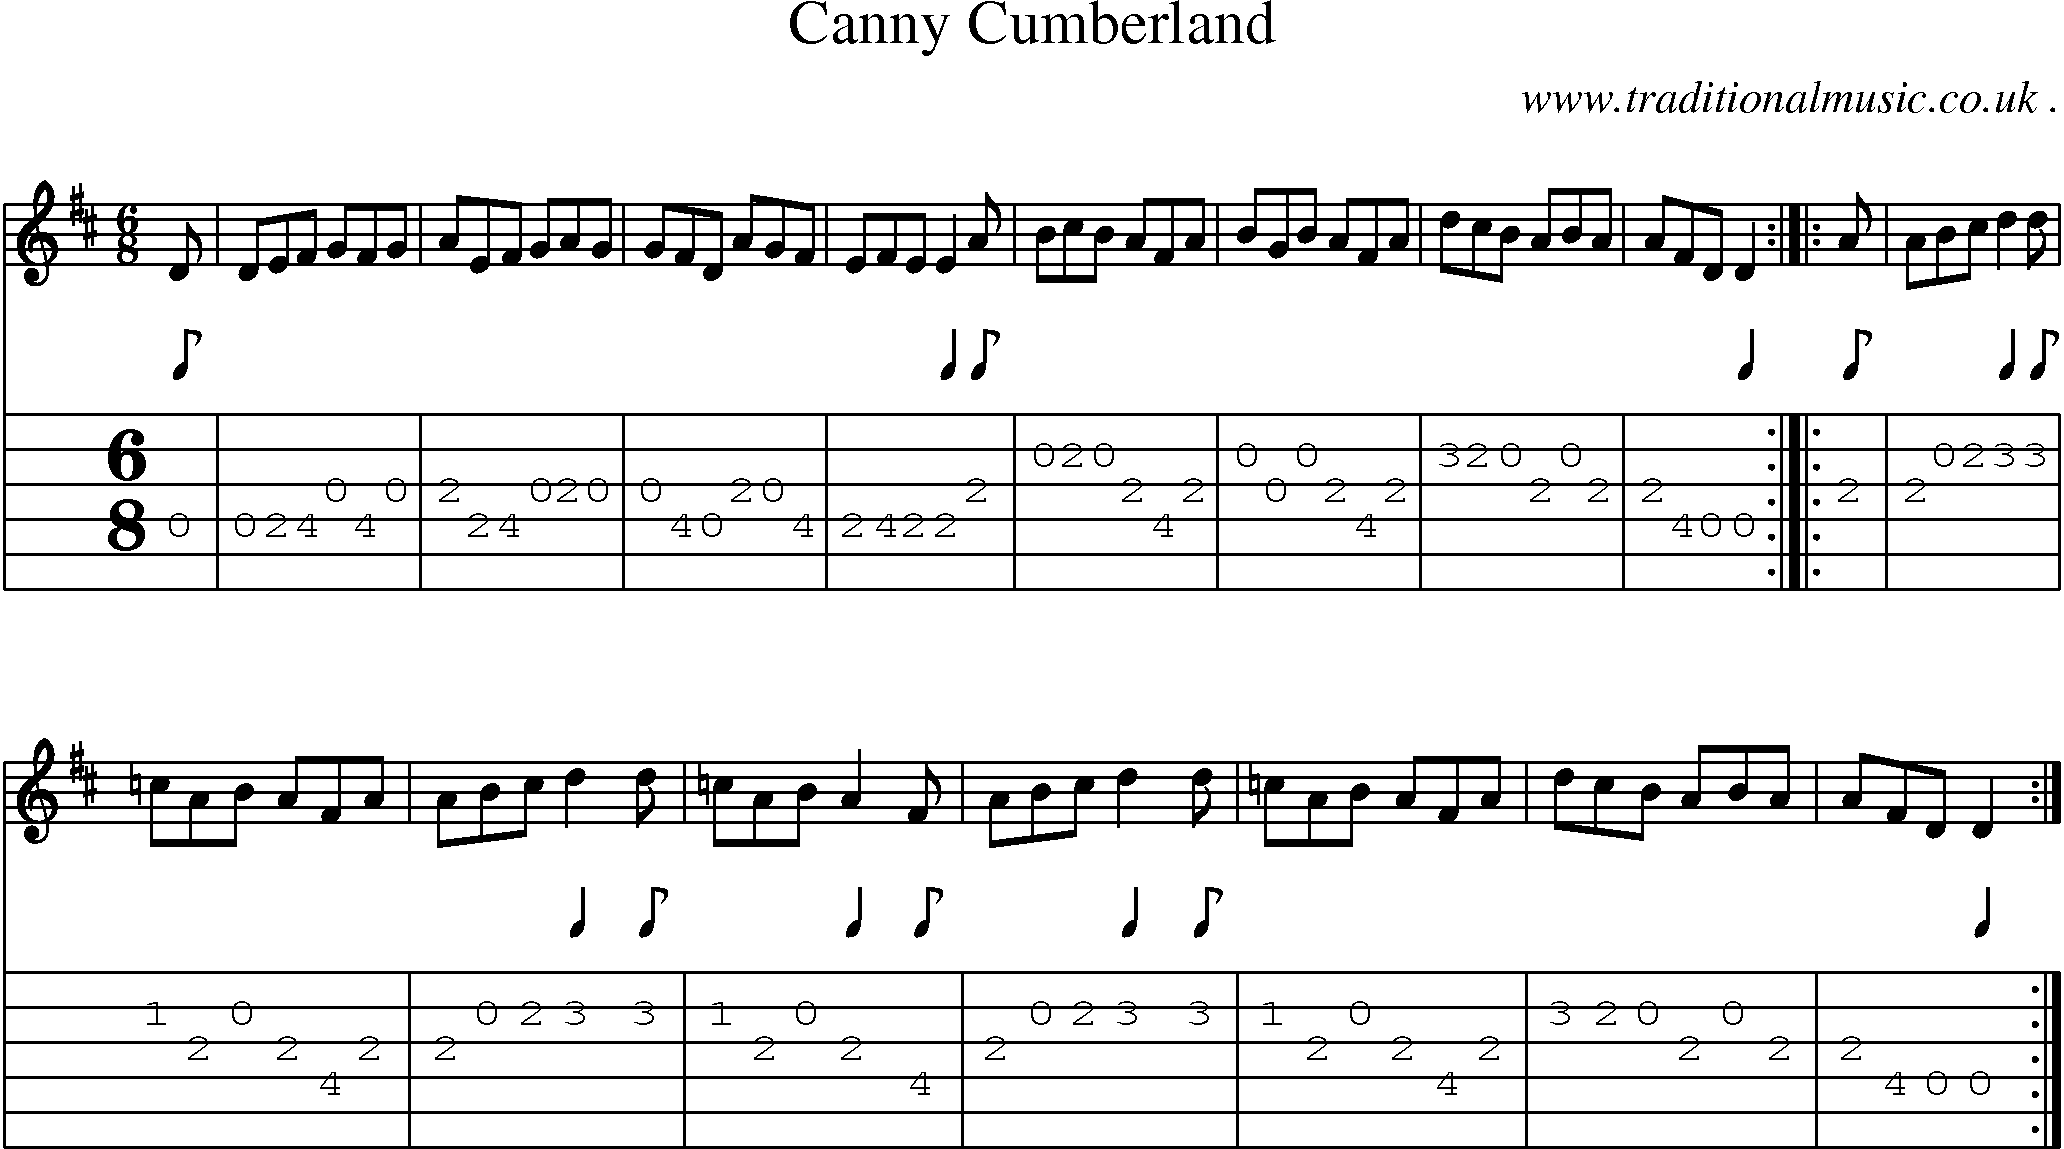 Sheet-Music and Guitar Tabs for Canny Cumberland